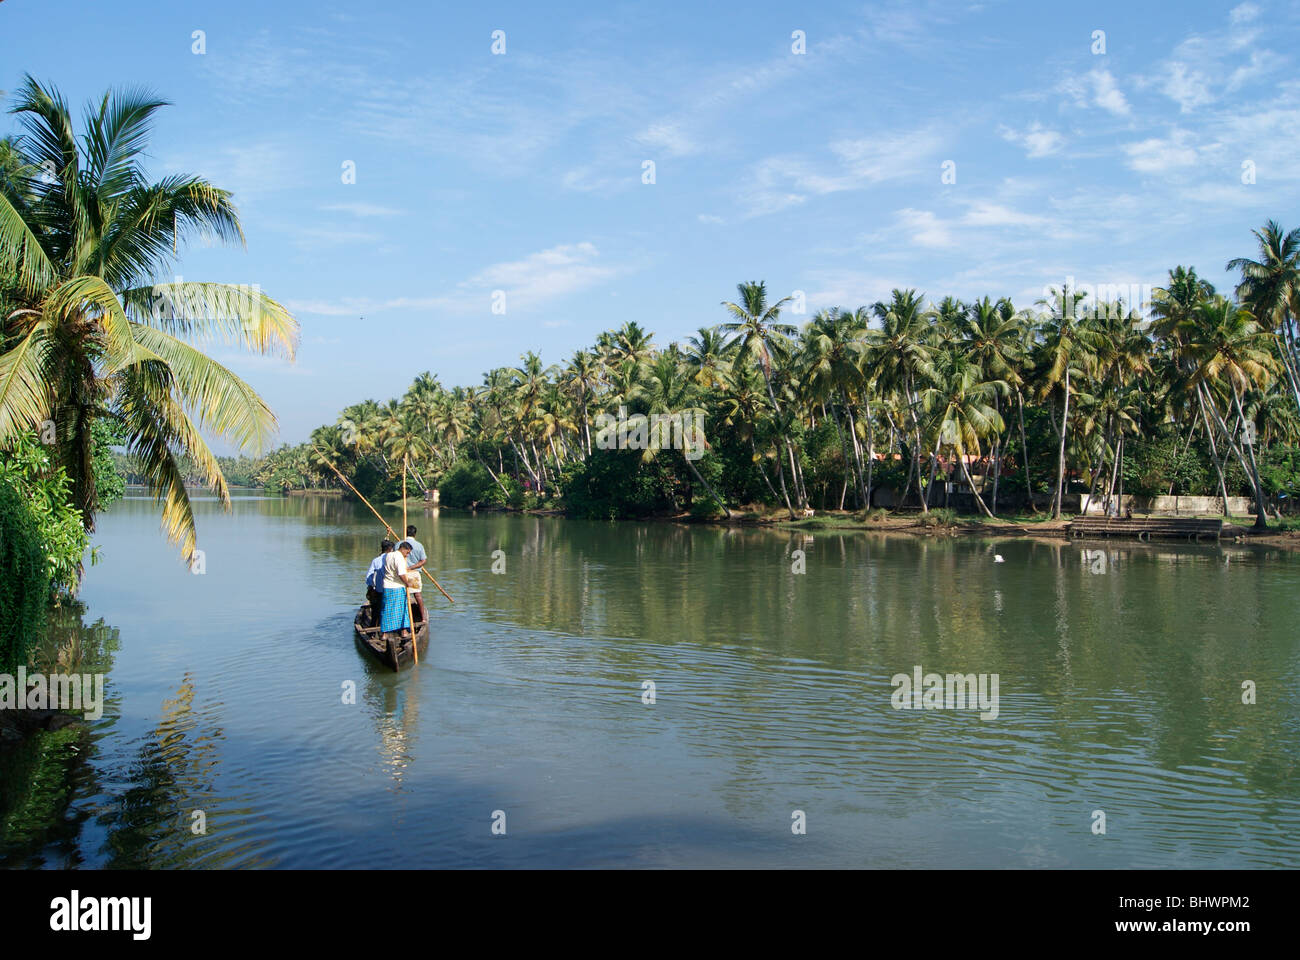 Kerala Coconut Palms landscape and Small Boat Journey of Village people through the backwaters.Scene from Kerala,India Stock Photo